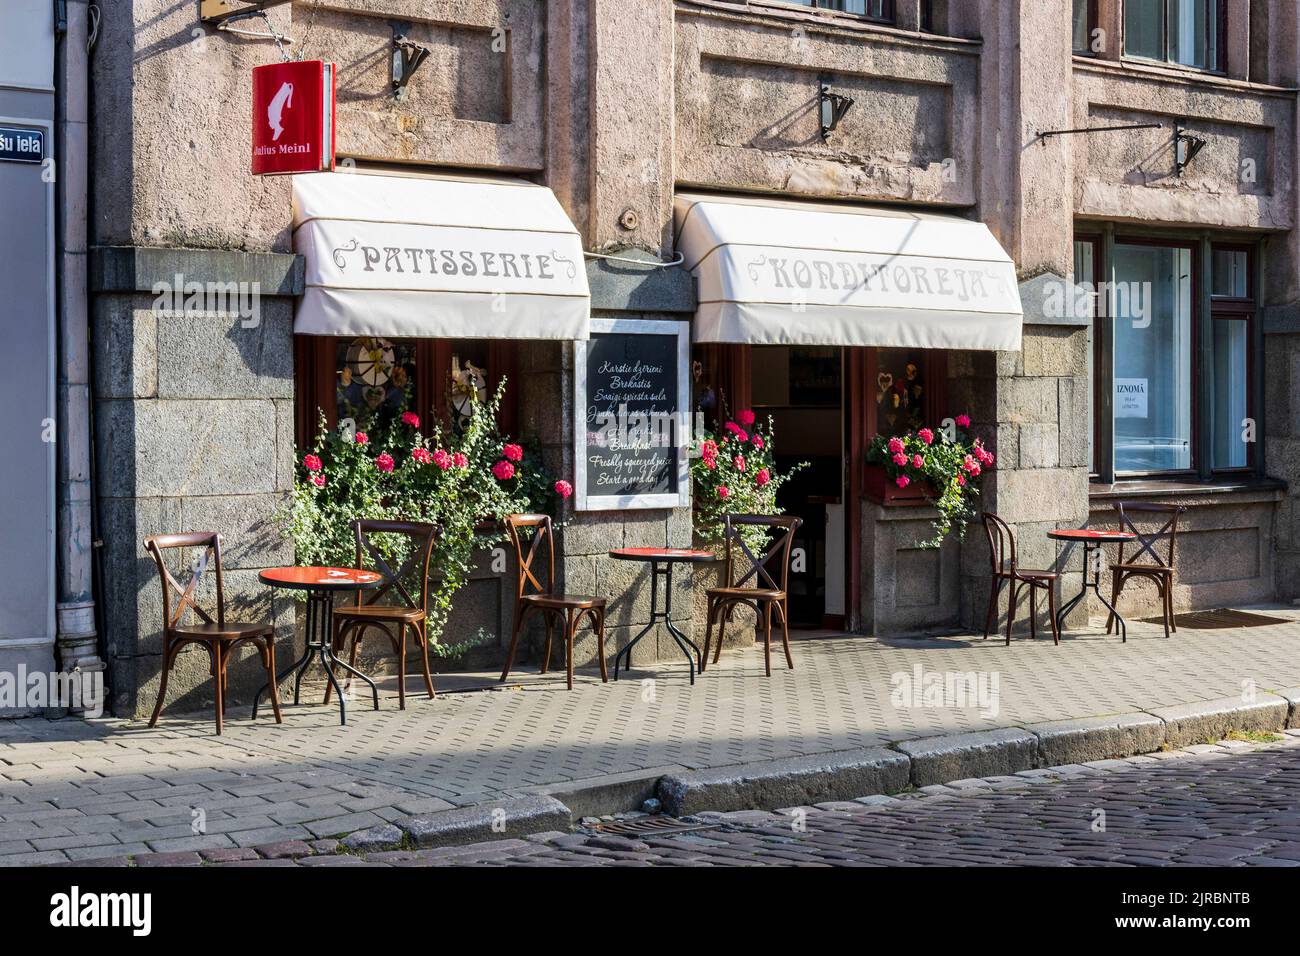 Bakery or patisserie with outdoor seating, Riga, Latvia, The Baltics, Europe Stock Photo